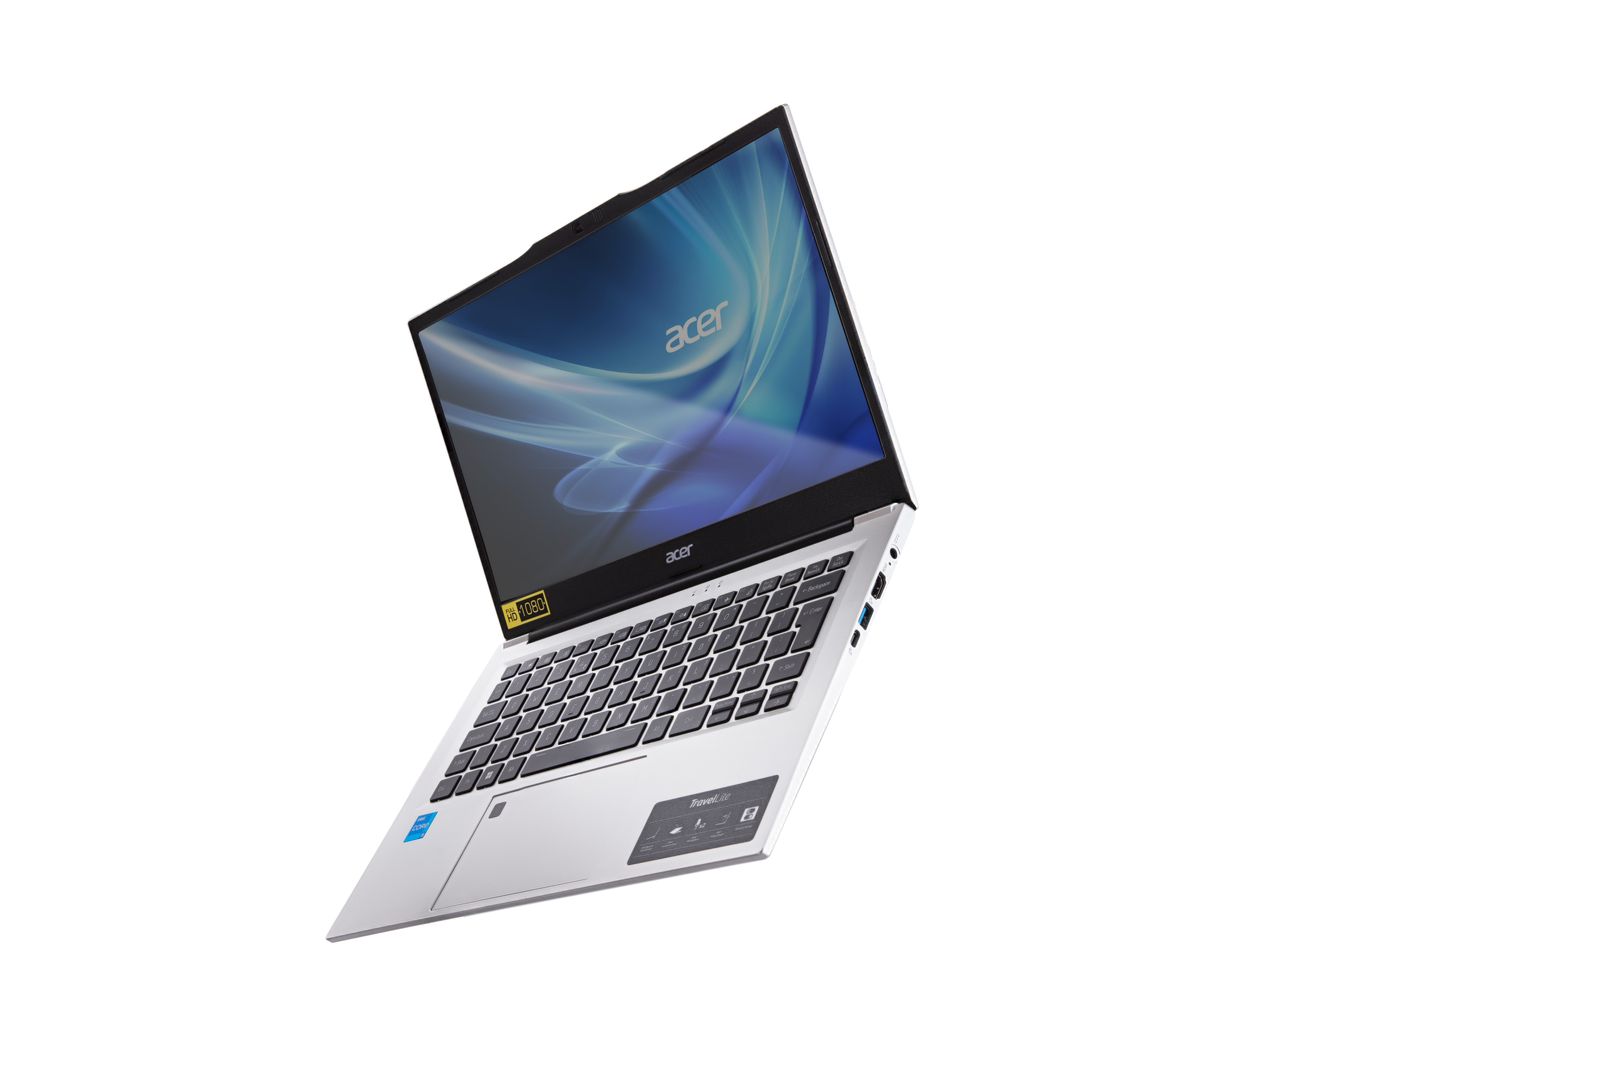 Acer TravelLite is the latest series of laptops by the brand in India